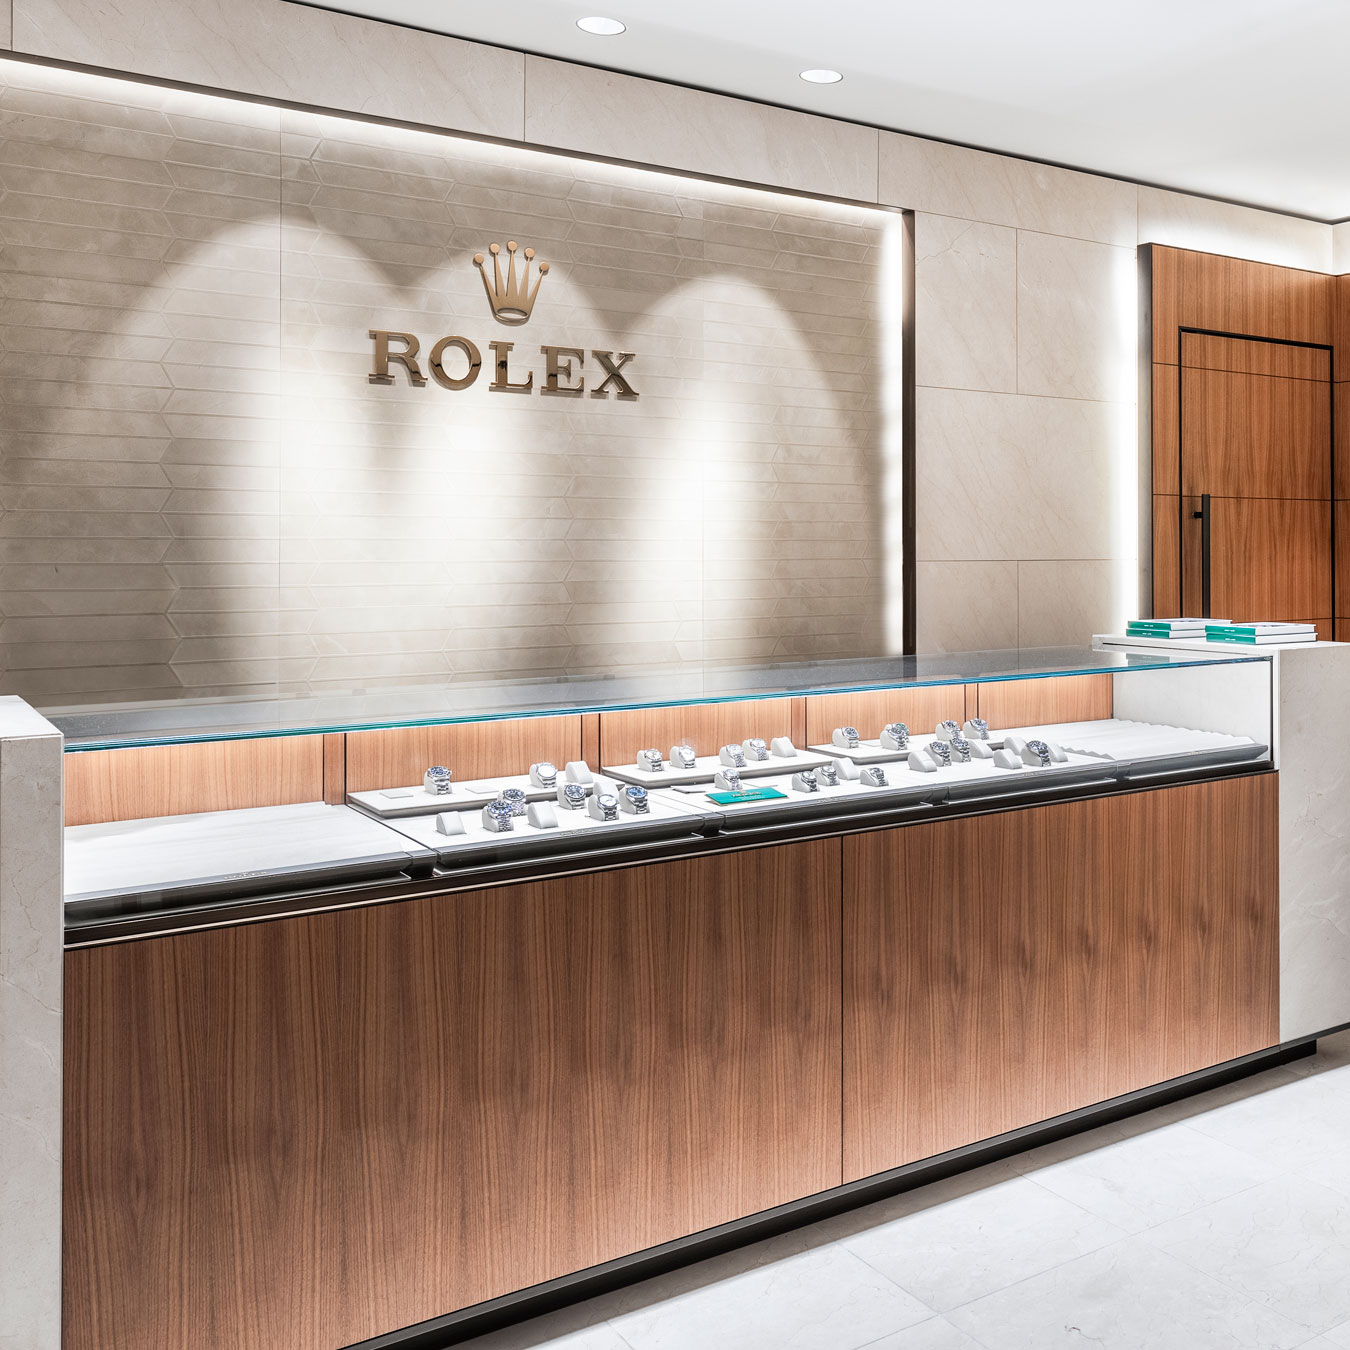 Commitment to Rolex